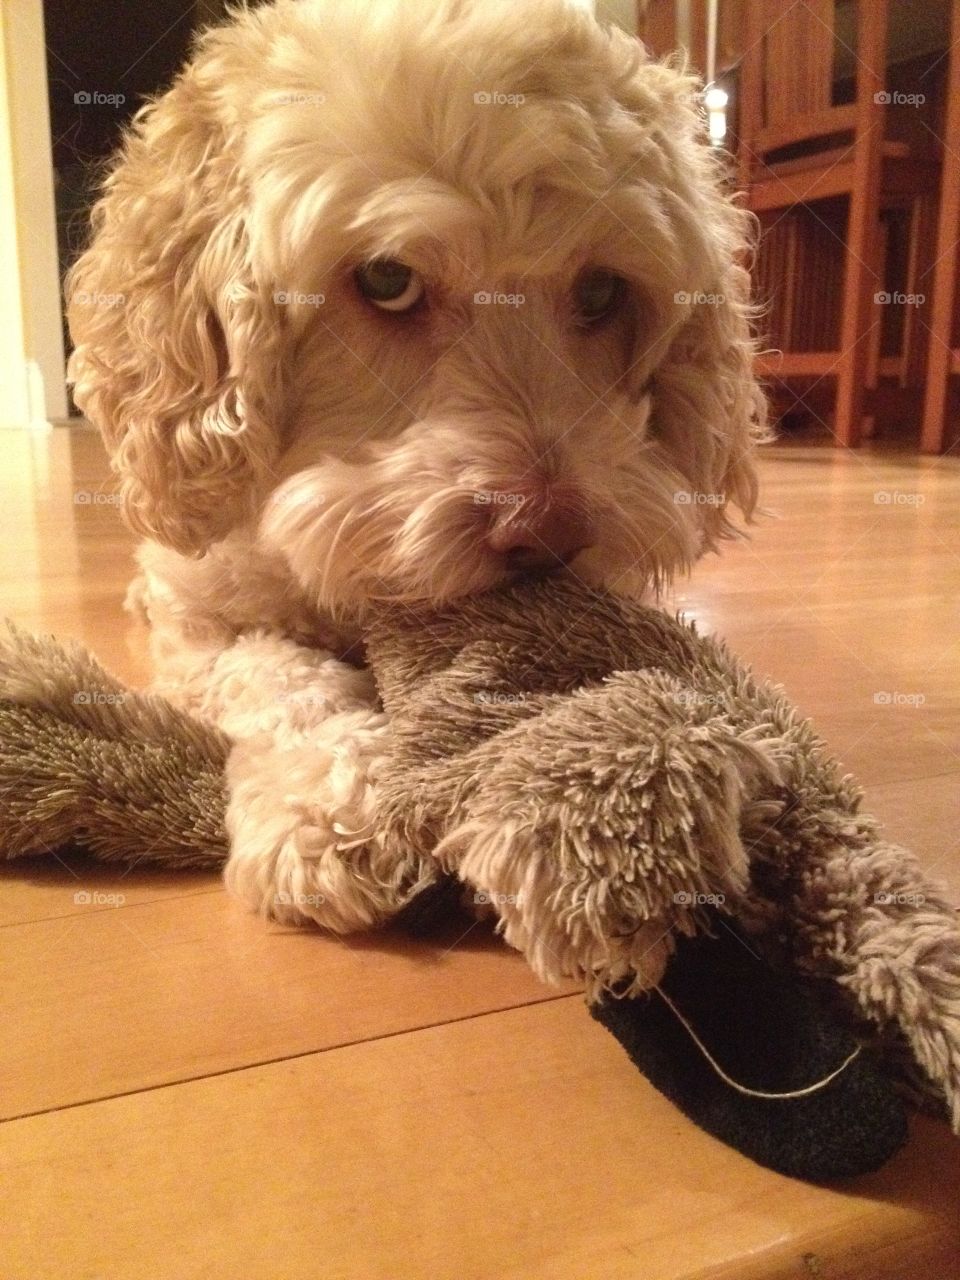 Cockapoo puppy doesn't want to share his toy.